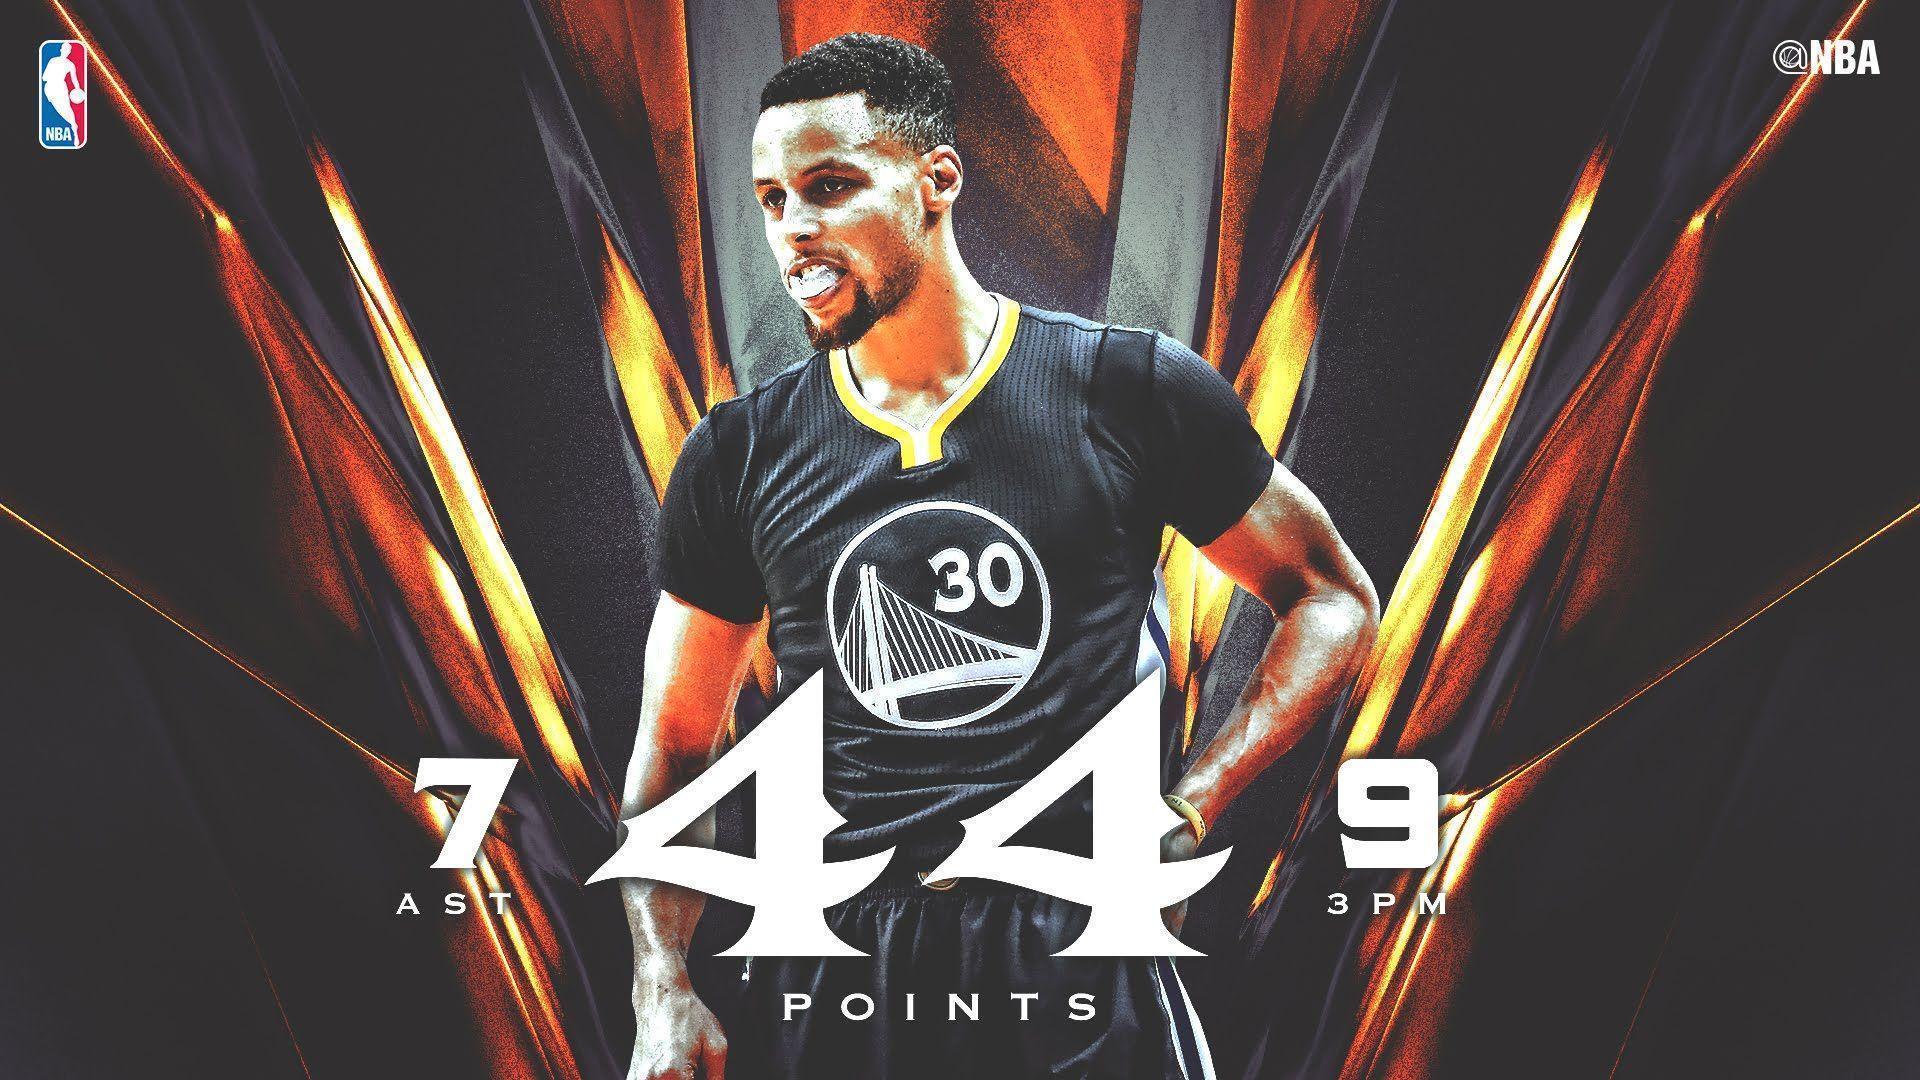 Stephen Curry Outduels Kyle Lowry as Warriors Stay Perfect. Boosh